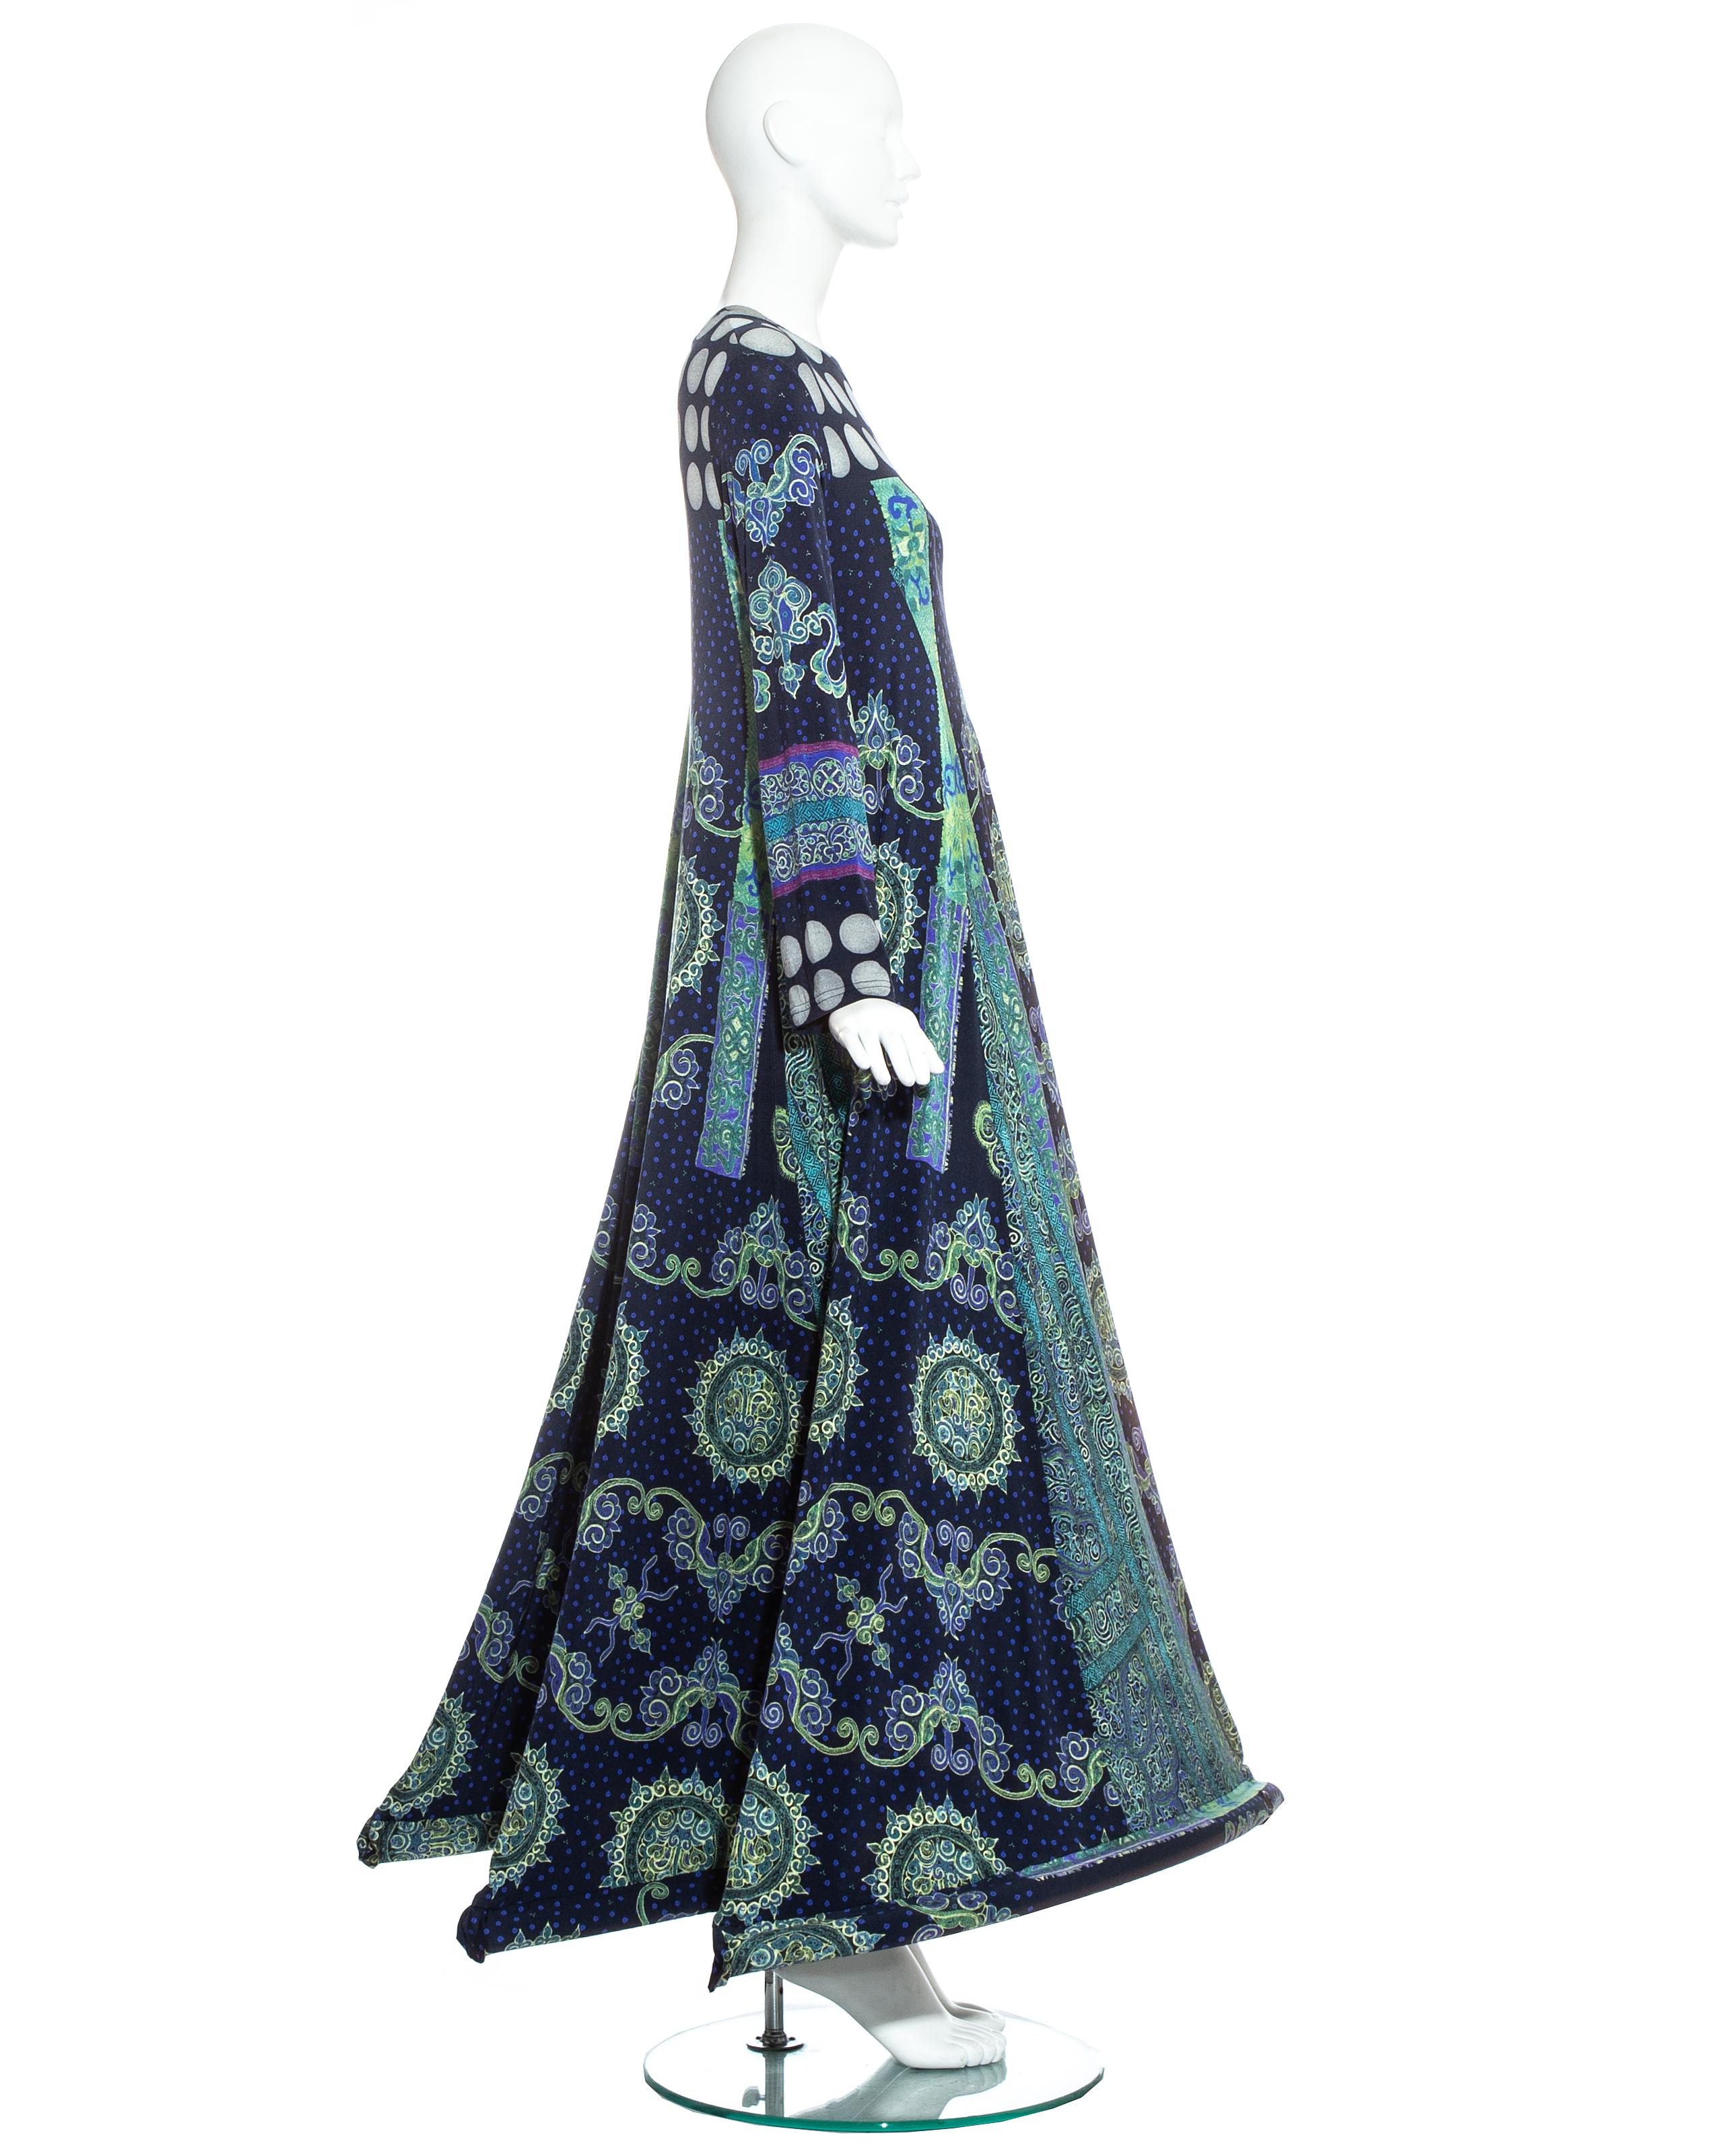 Issey Miyake maxi dress in blue jersey with Indian print.  Inflatable hemmed skirt which creates beautiful shilhouetes when walking. 

Spring-Summer 2001 